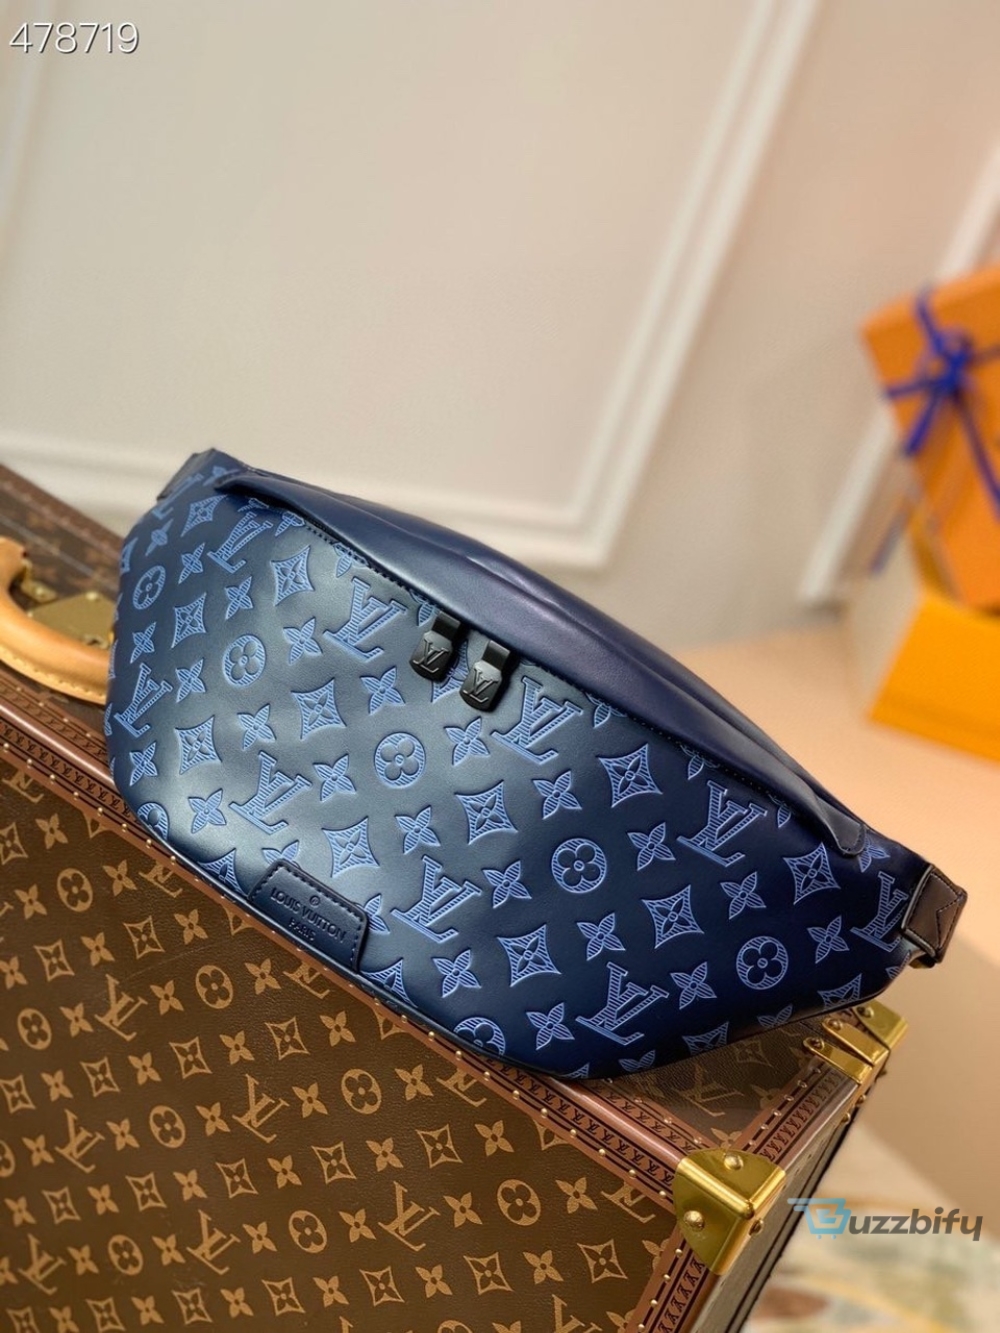 louis vuitton discovery bumbag pm monogram shadow navy blue for men mens belt bags 173in44cm lv m45729 2799 buzzbify 1 21